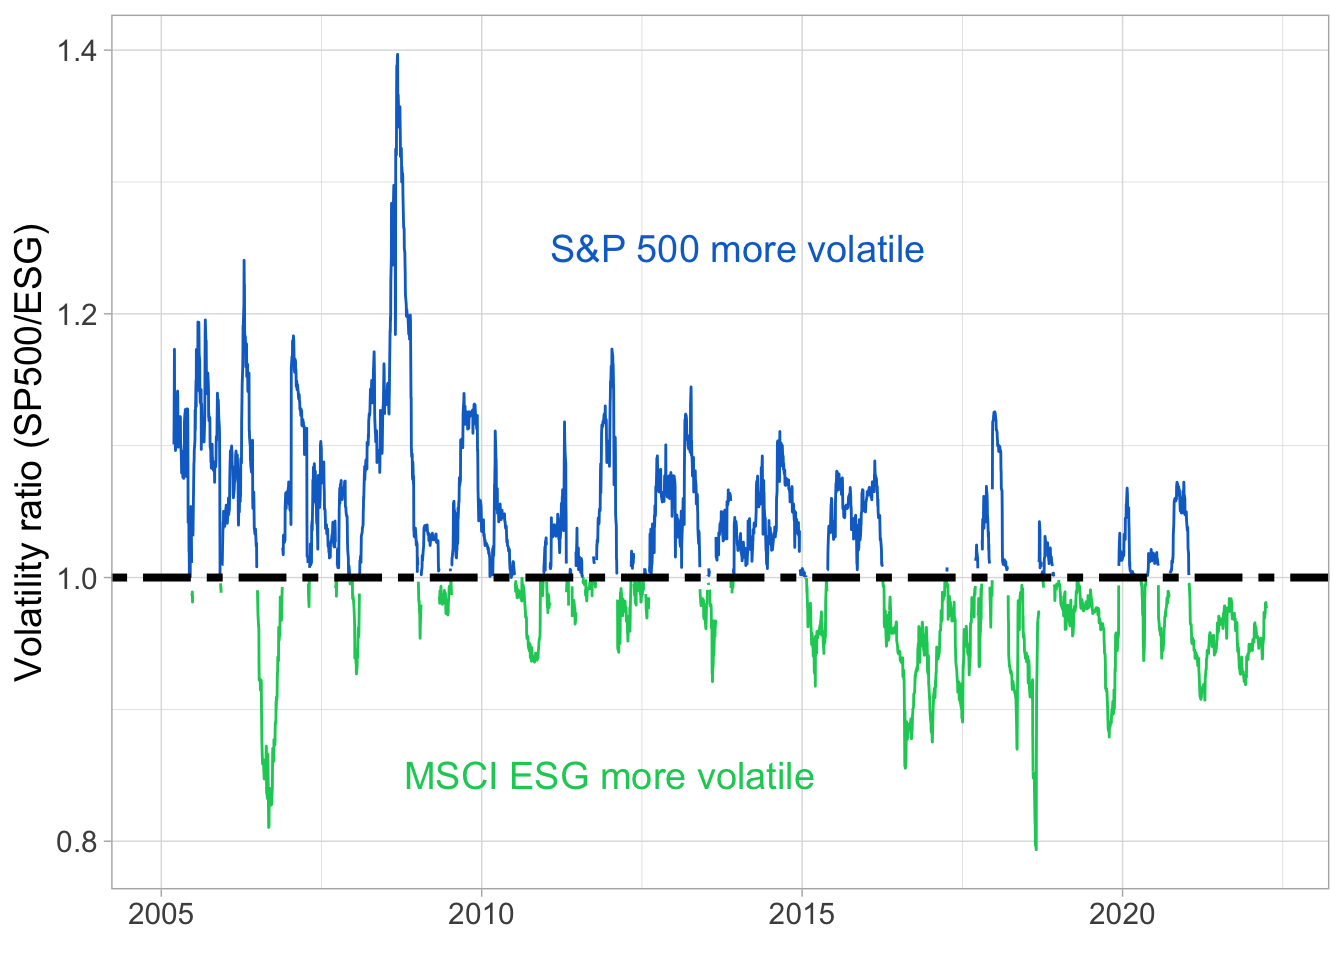 Volatility ratio. We plot the ratio of the S&P 500 volatility divided by the volatility of the MSCI ESG index. Realized volatilities are computed as the standard deviation of the daily returns over the past 60 trading days.